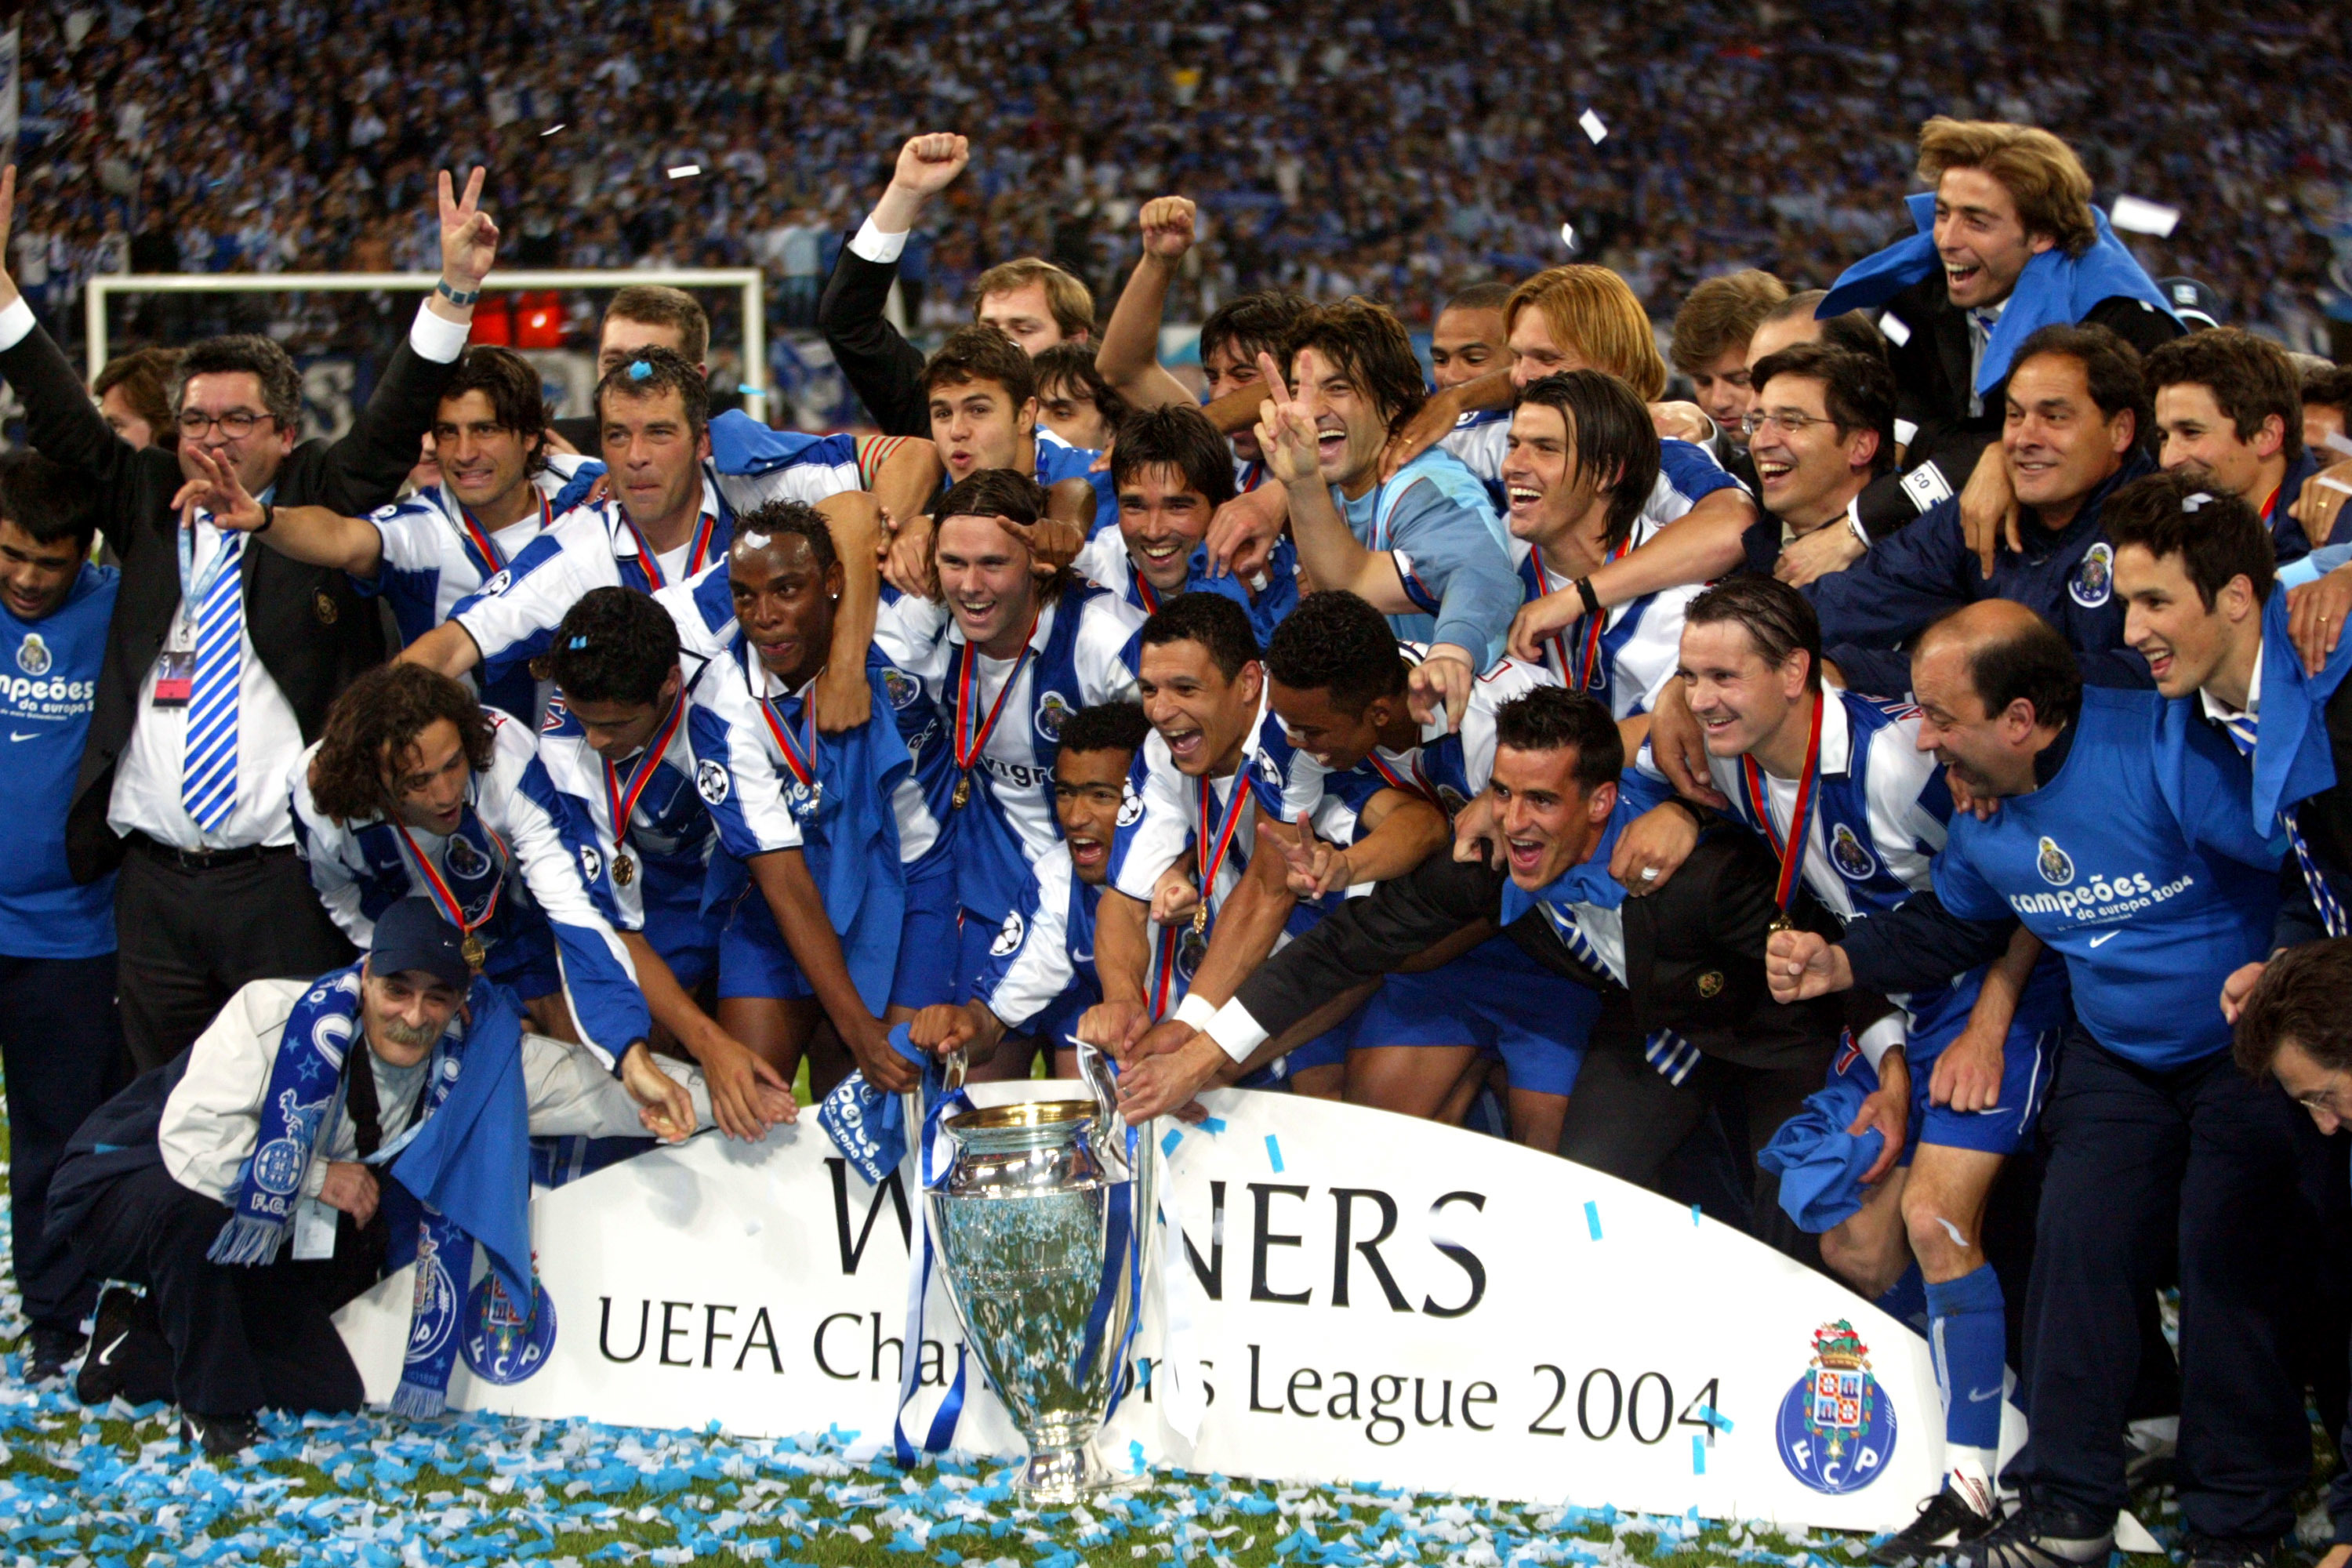 Porto celebrate their surprise Champions League victory in 2004. Image: PA Images